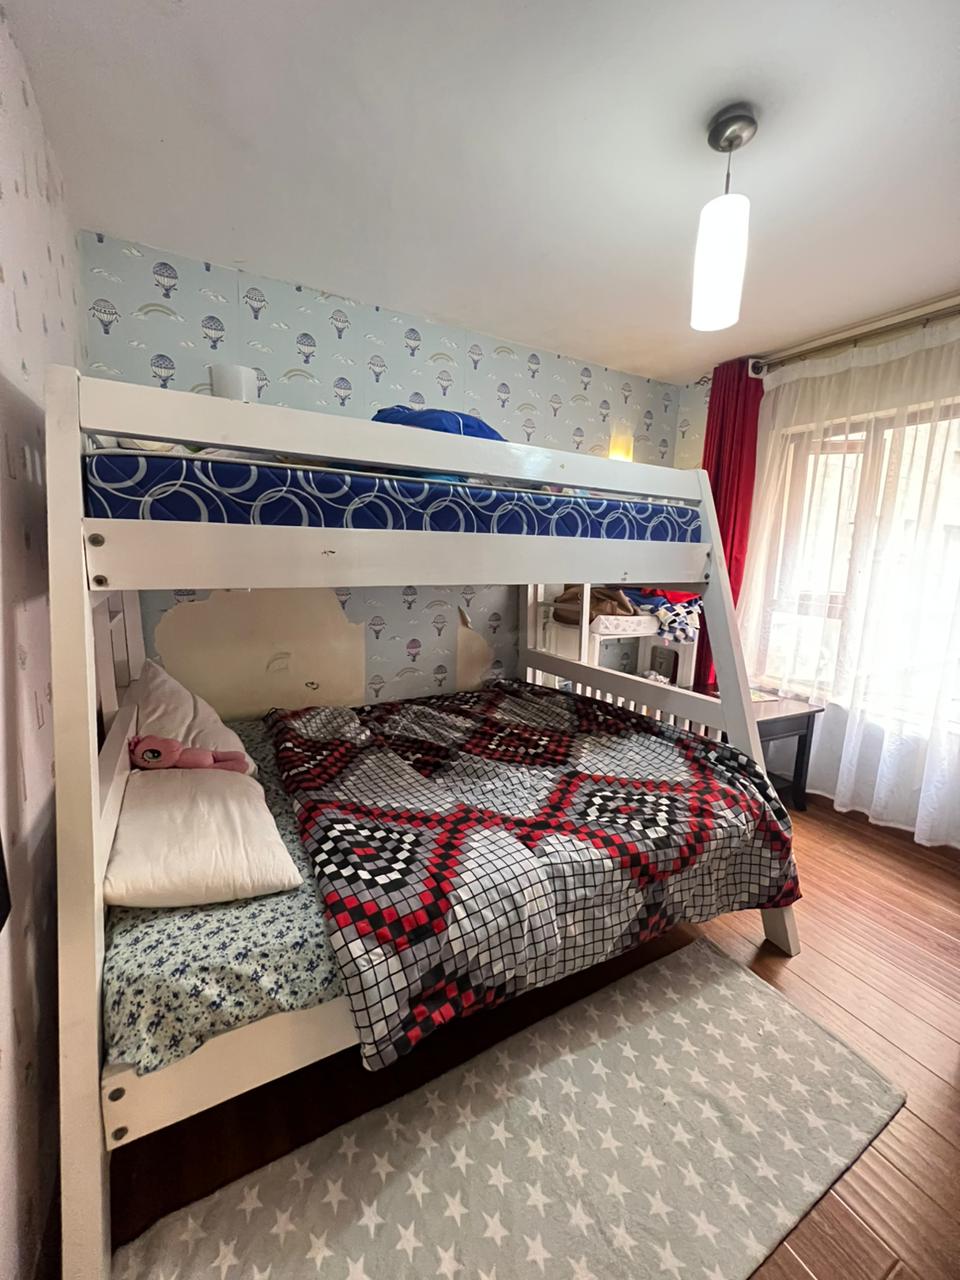 Spacious modern 2 bedroom plus dsq apartment for sale in Kileleshwa, Nairobi. Only 18 units in the compound. Backup generator. Price 15.5M Musilli Homes